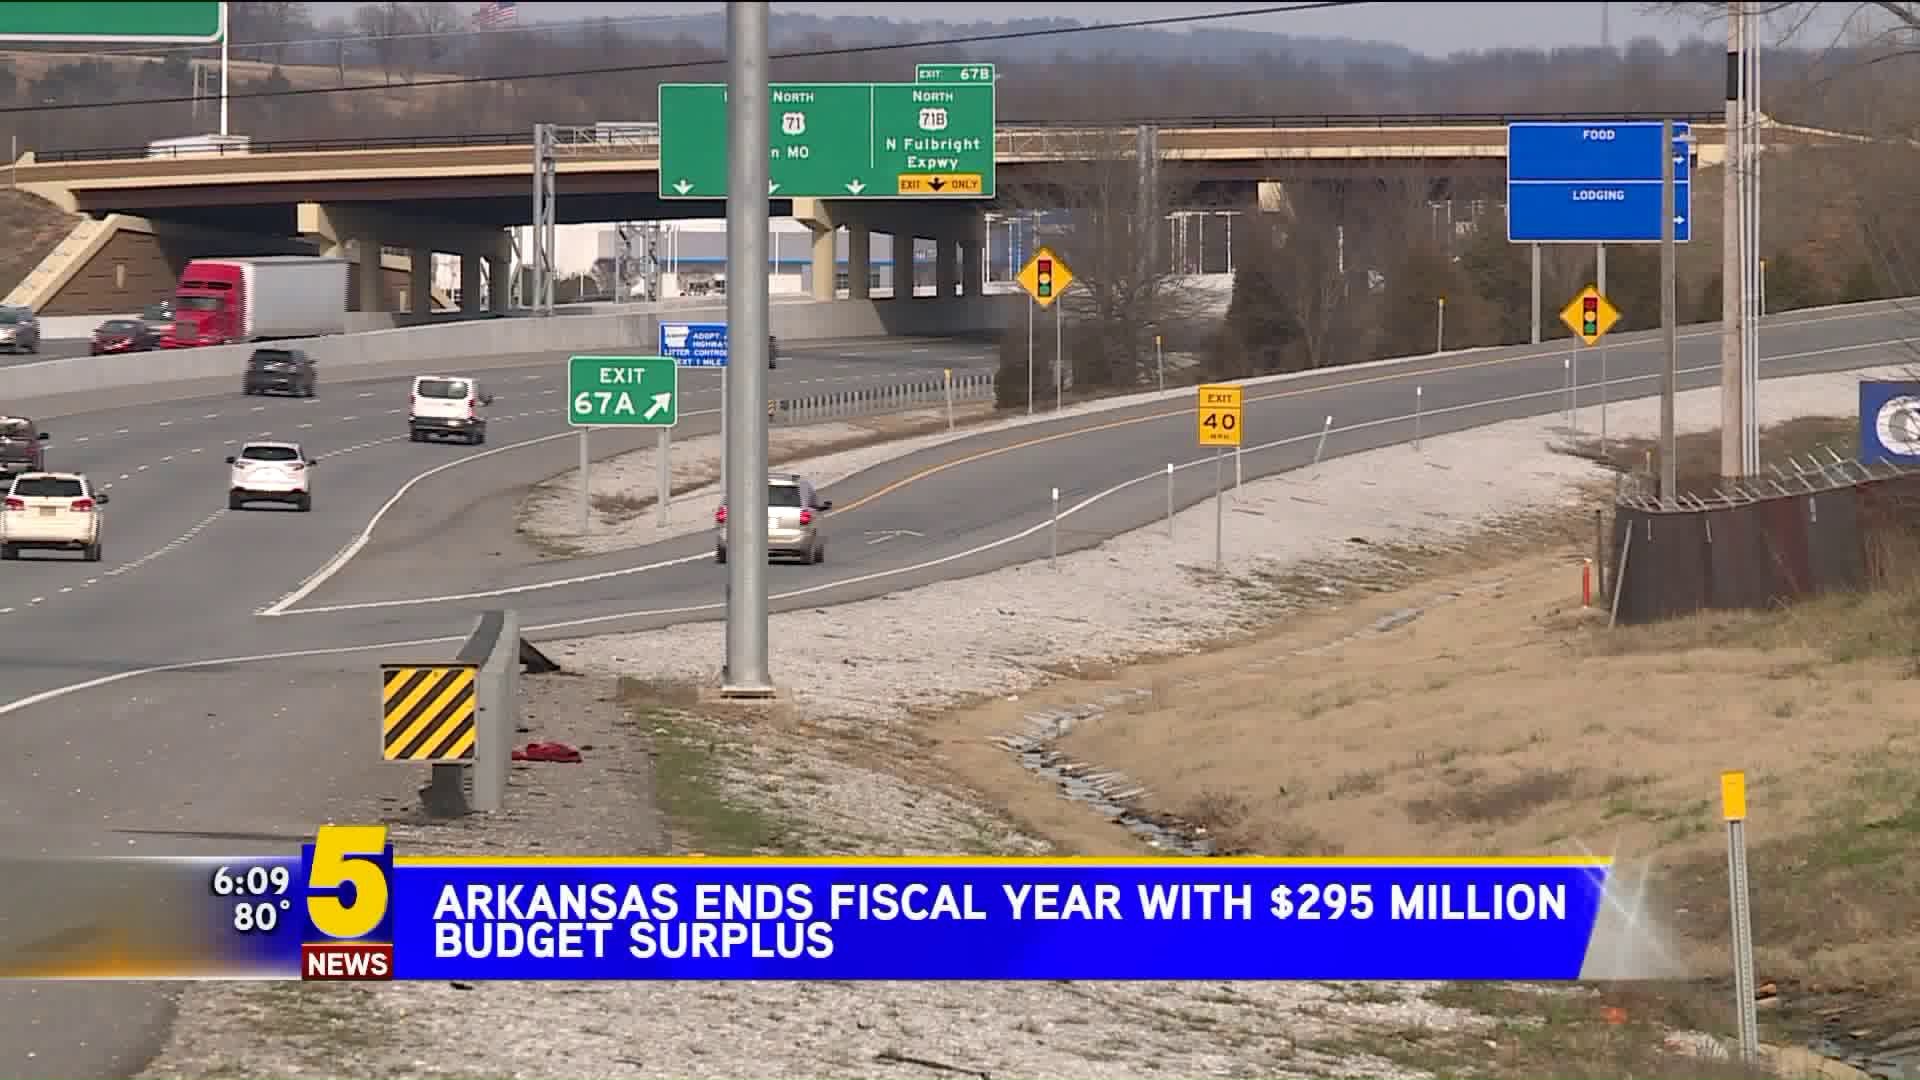 Arkansas Ends Fiscal Year with $298 Million Budget Surplus